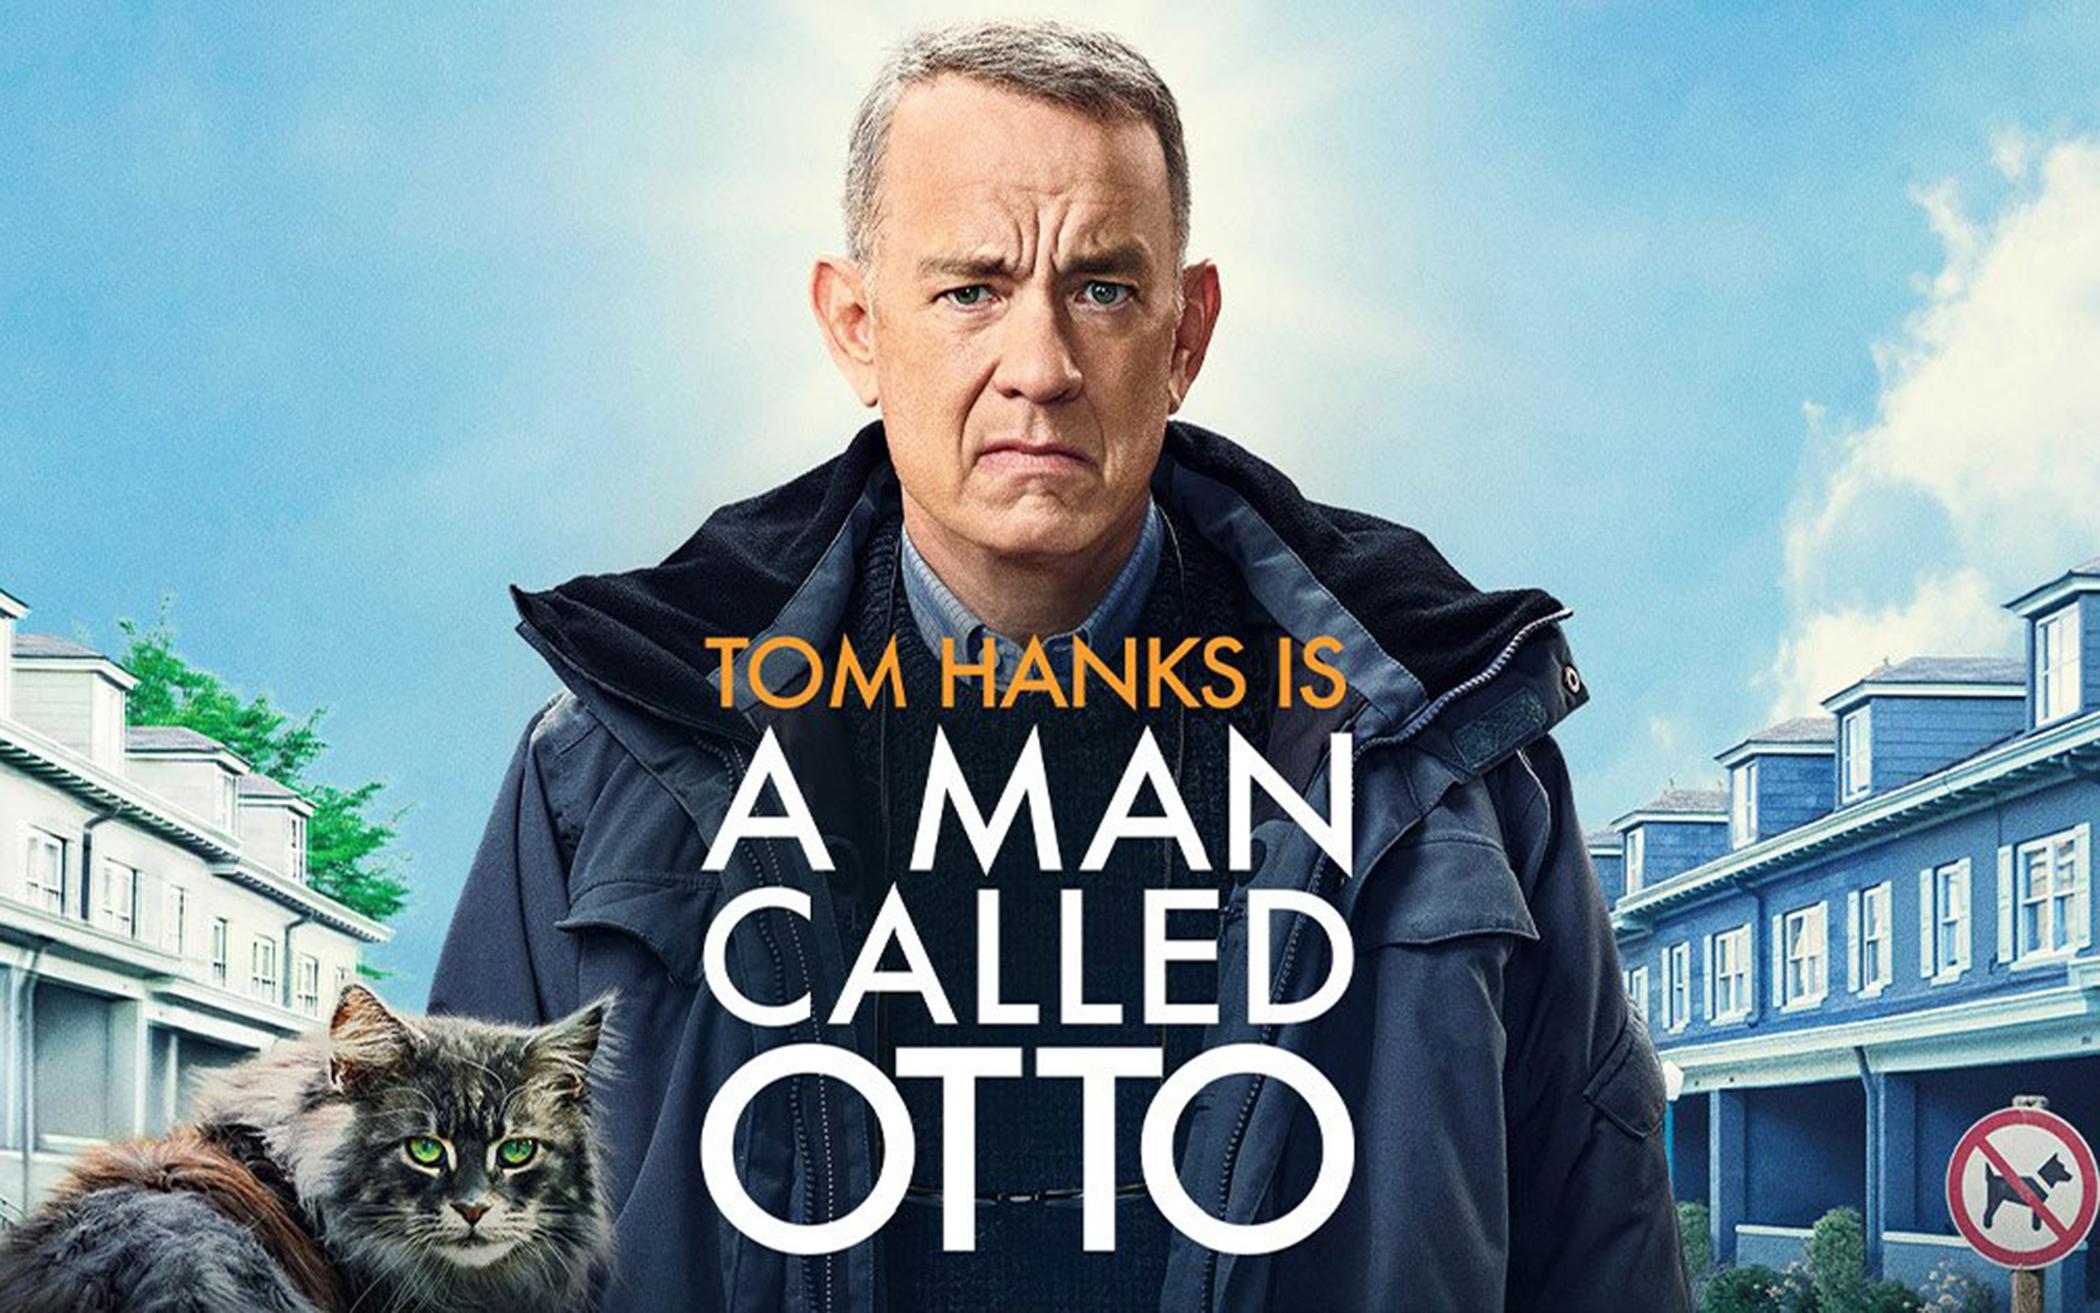 A Man Called Otto (2023) Review: Tom Hanks Shines in This Heartwarming Remake